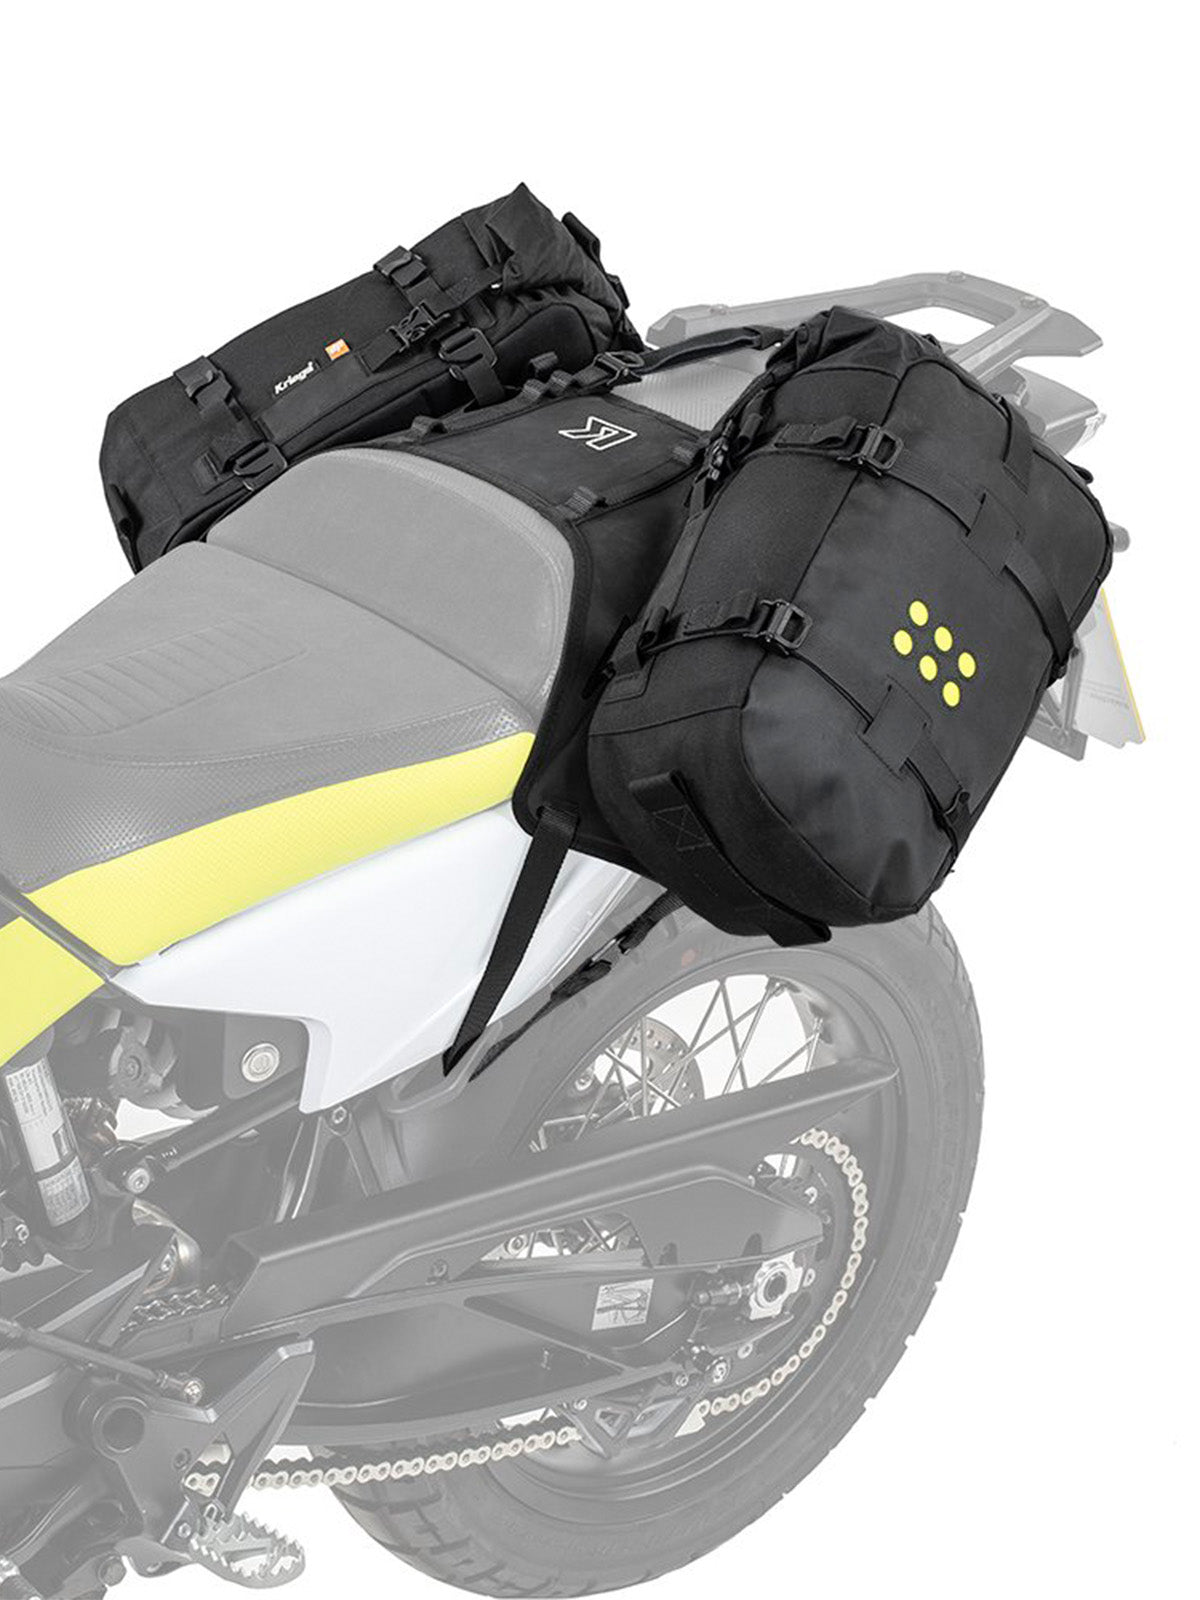 Kriega OS BASE Husqvarna Norden 901 fitted with two os12 adventure packs